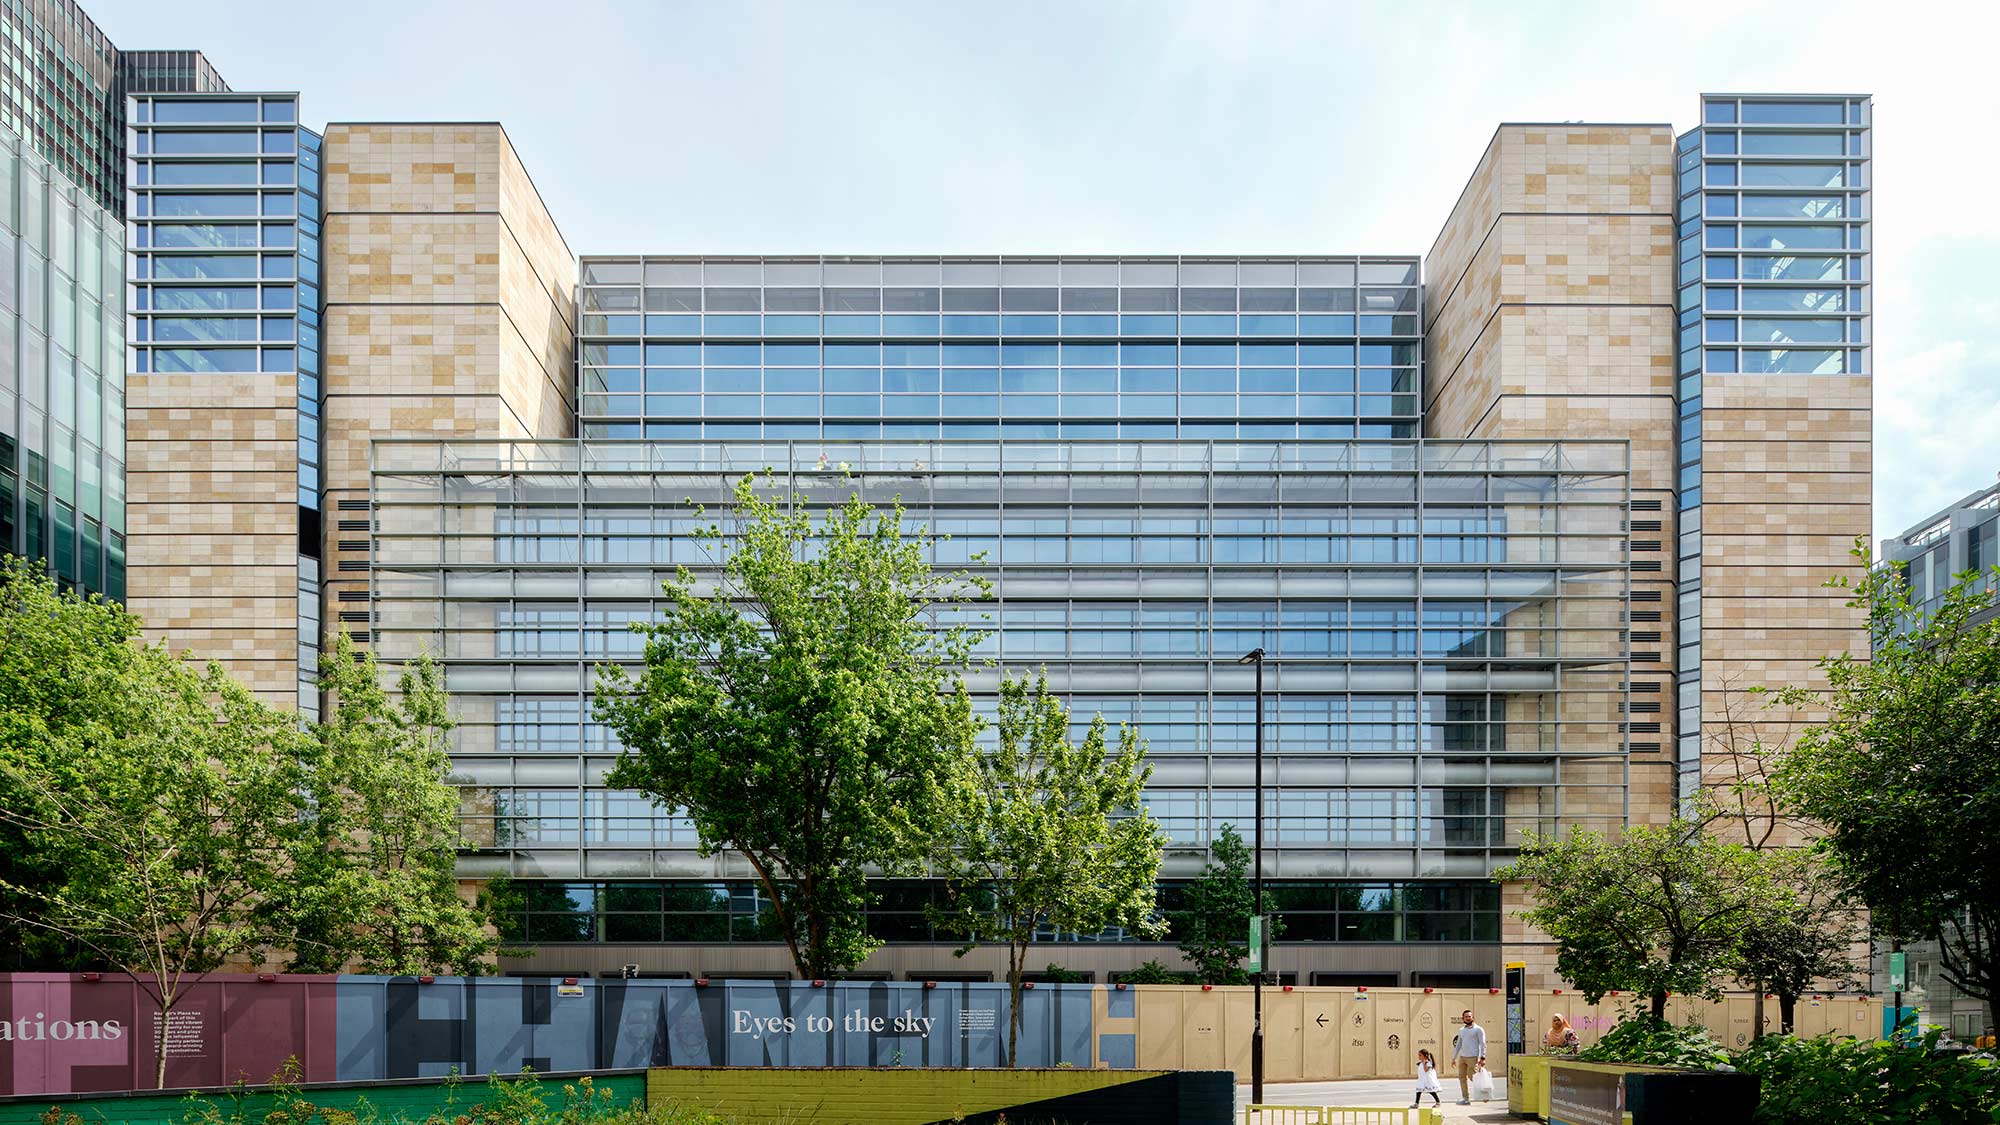 1 Triton Square: How can existing buildings combat climate change?